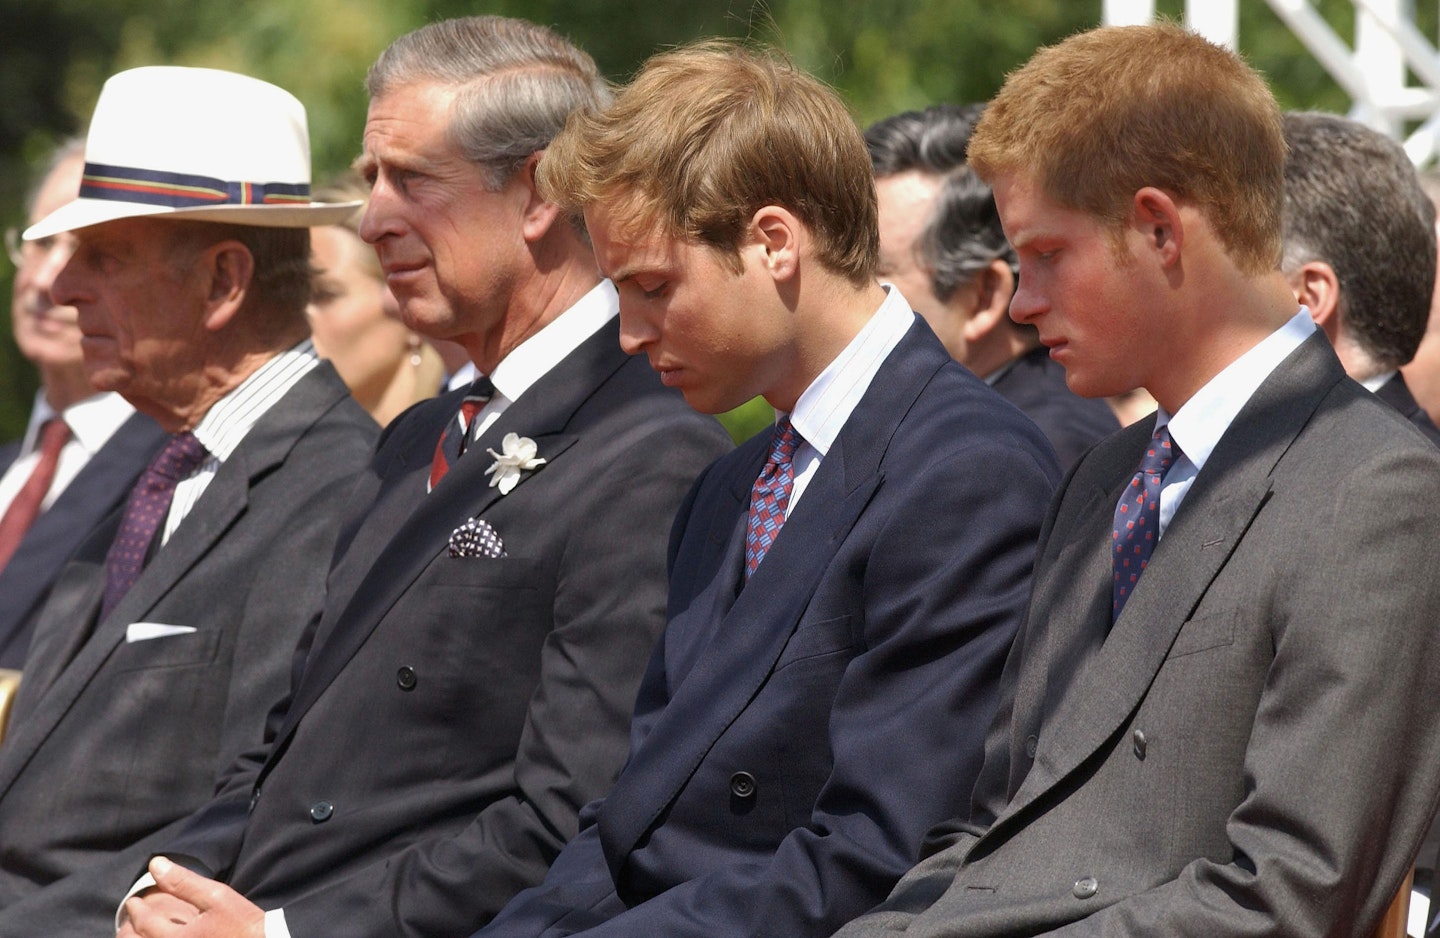 The Best Pictures of Prince Philip With His Grandsons, Prince William and Prince Harry